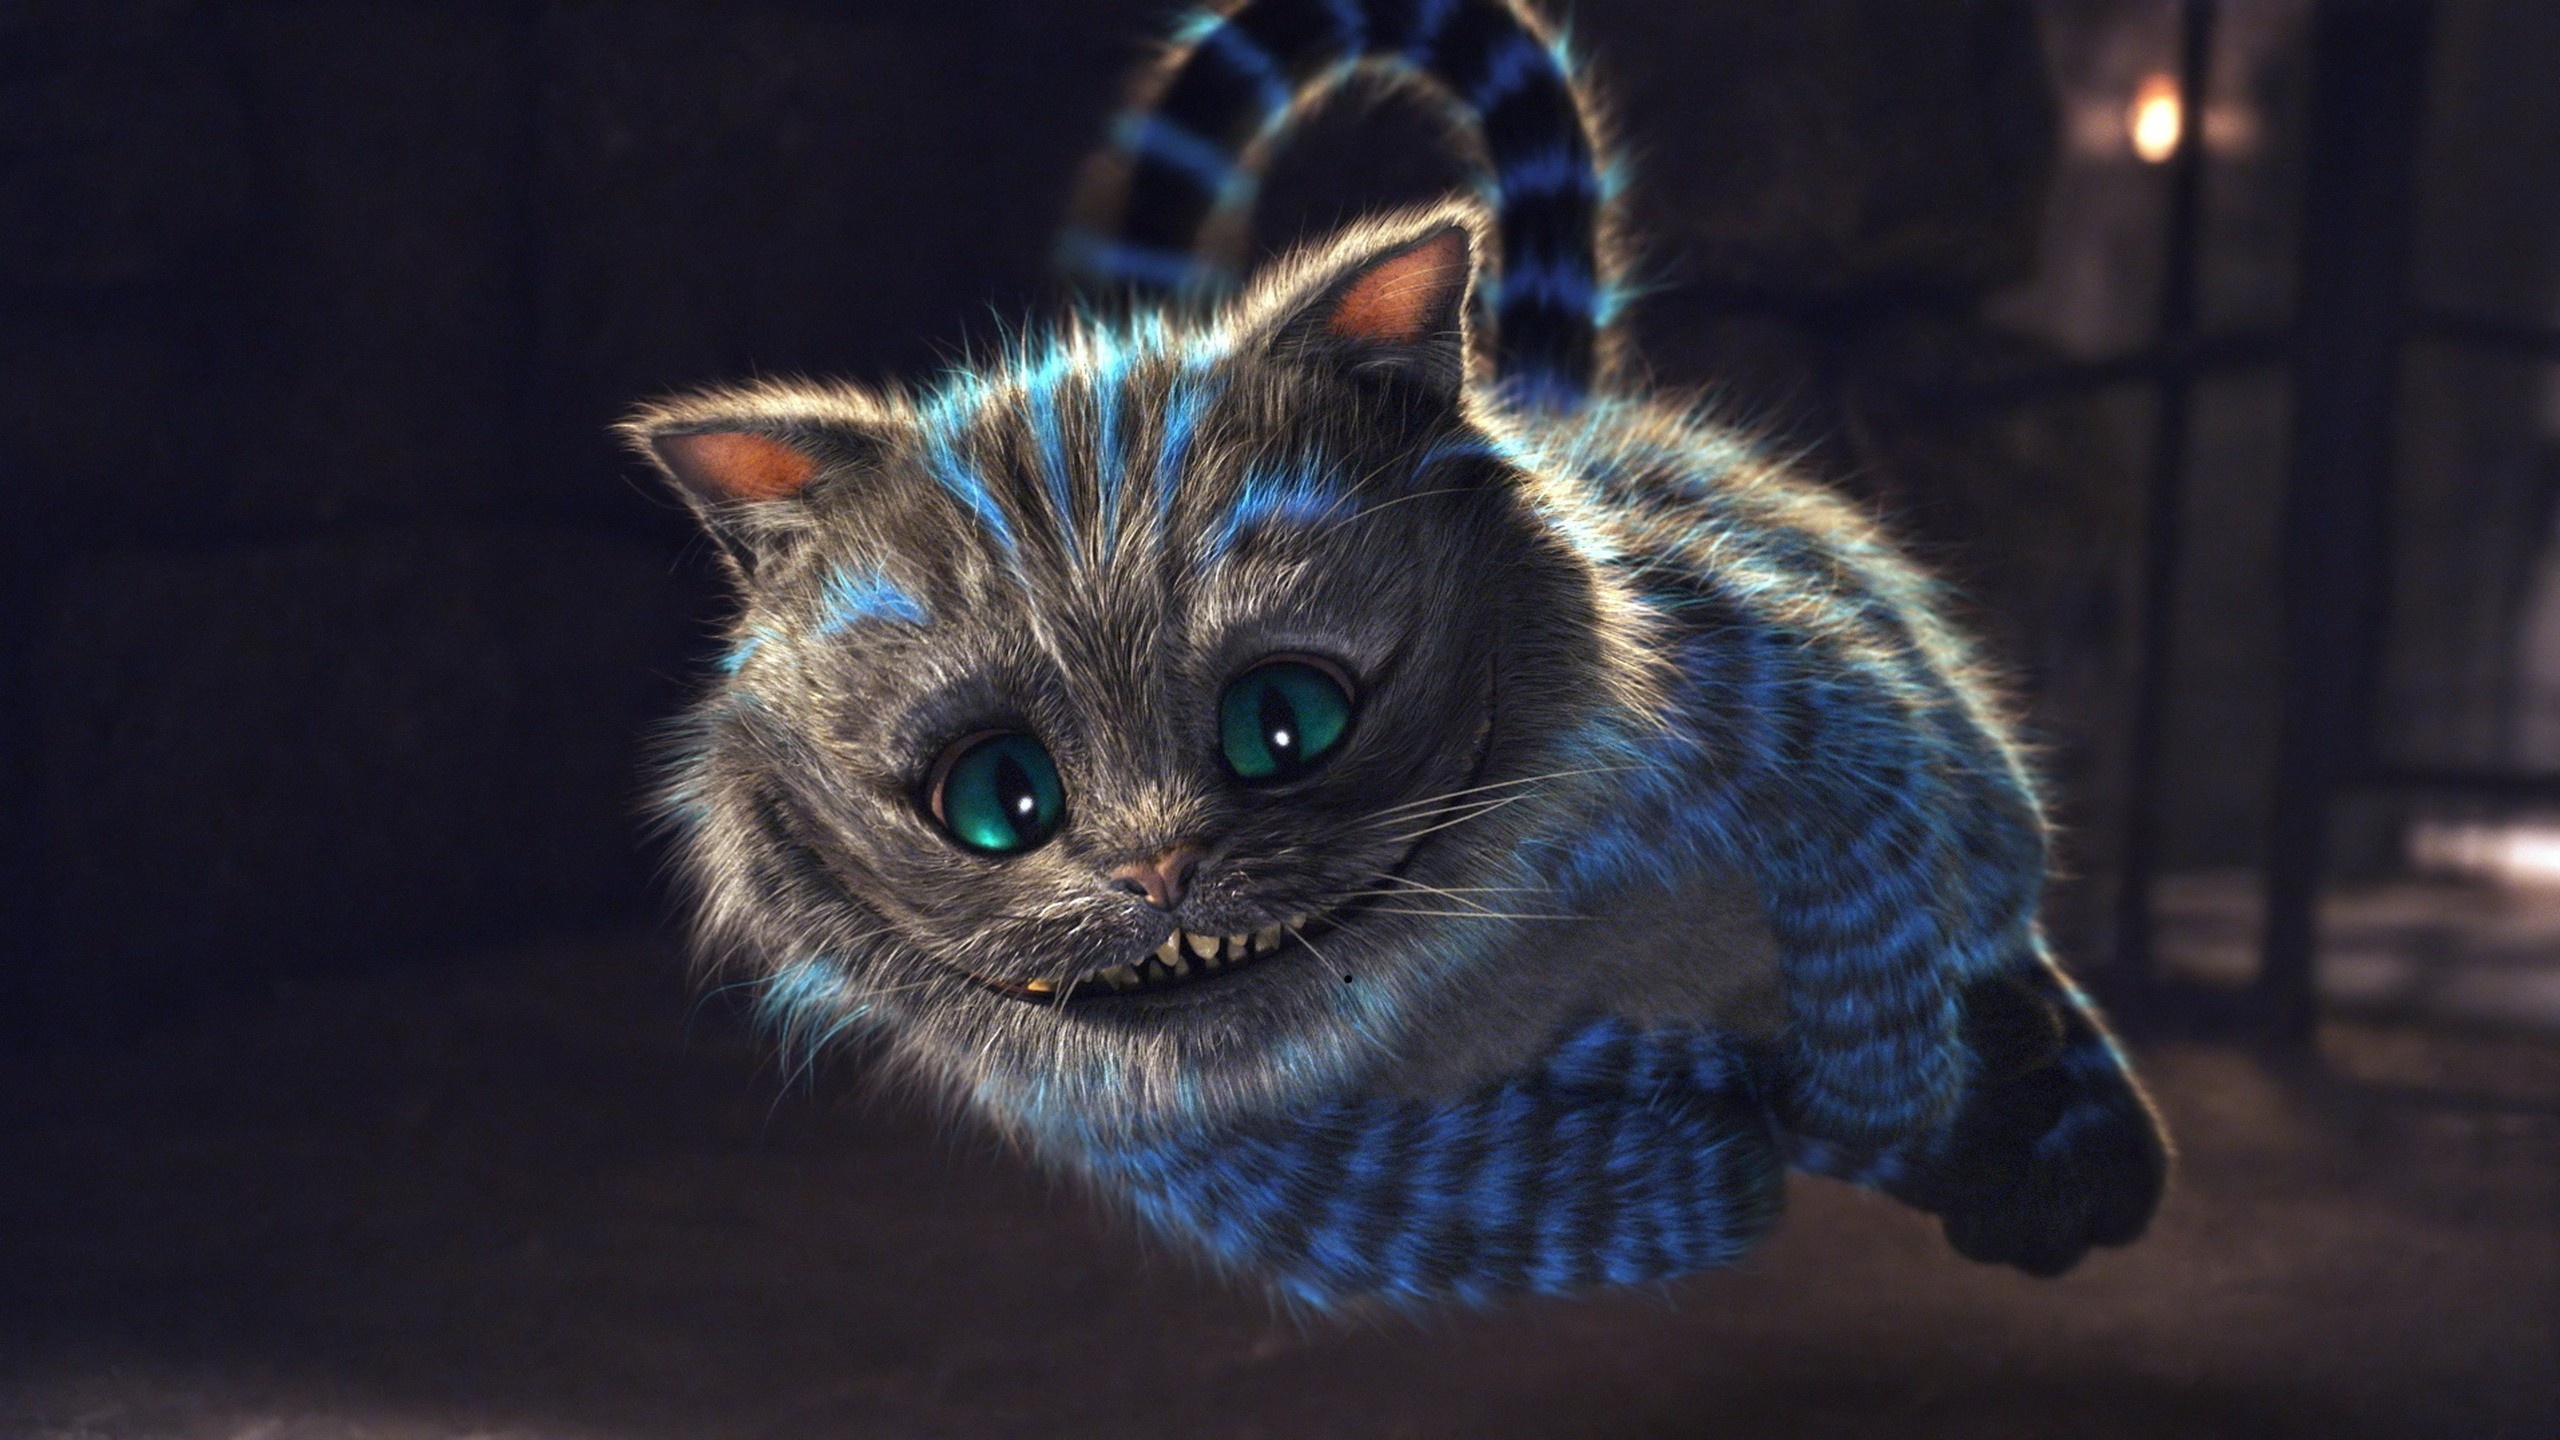 Cheshire Cat: Felis catus, The unique ability to appear and disappear. 2560x1440 HD Wallpaper.